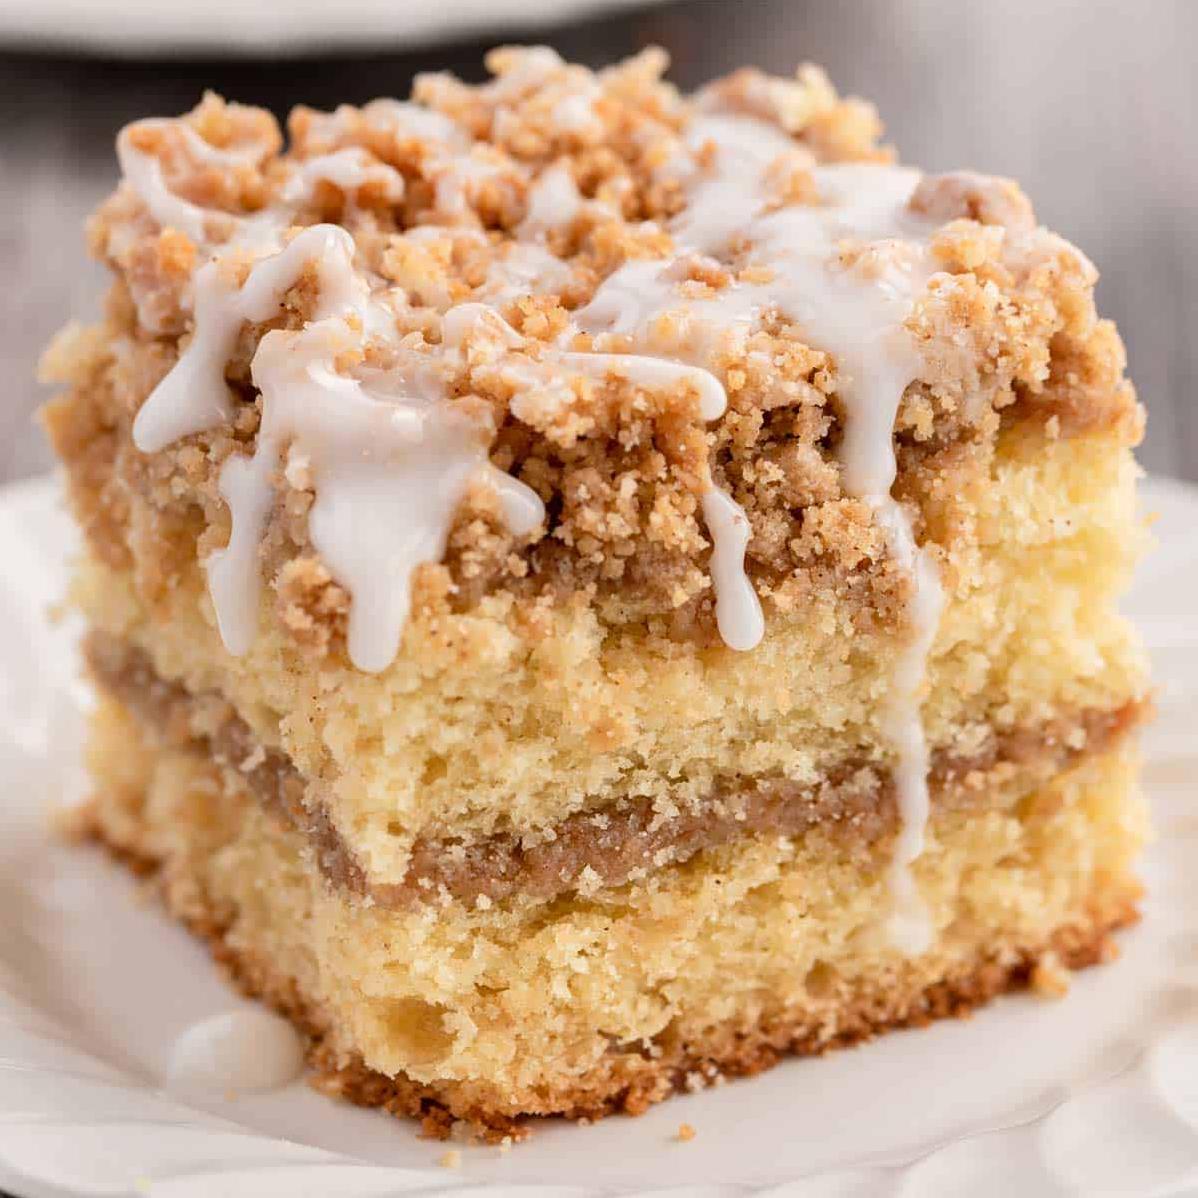  A slice of this cake is like a mini vacation in your mouth.